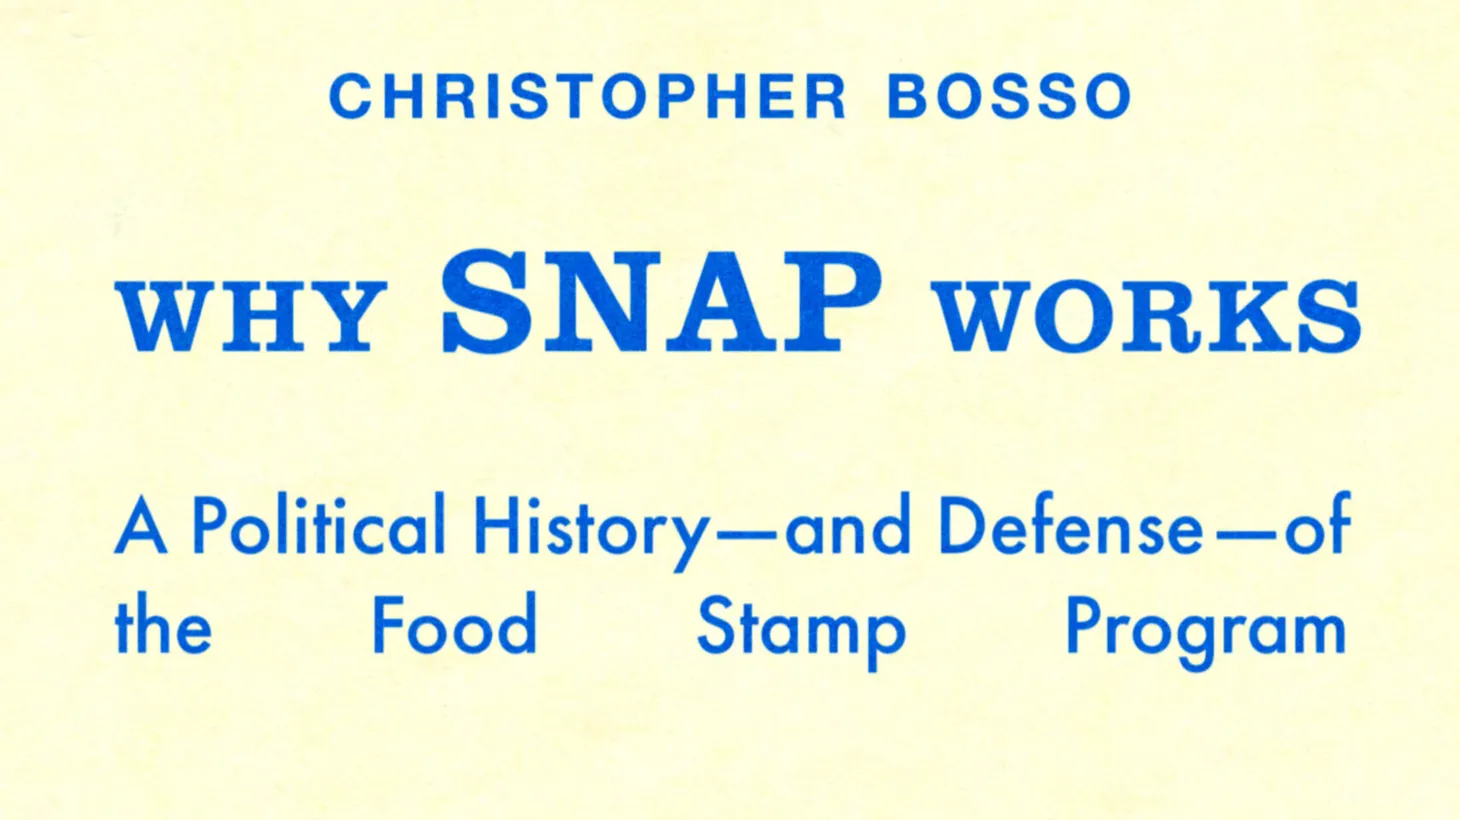 Christopher Bosso's newest book, “Why SNAP Works: A Political History—and Defense—of the Food Stamp Program.”